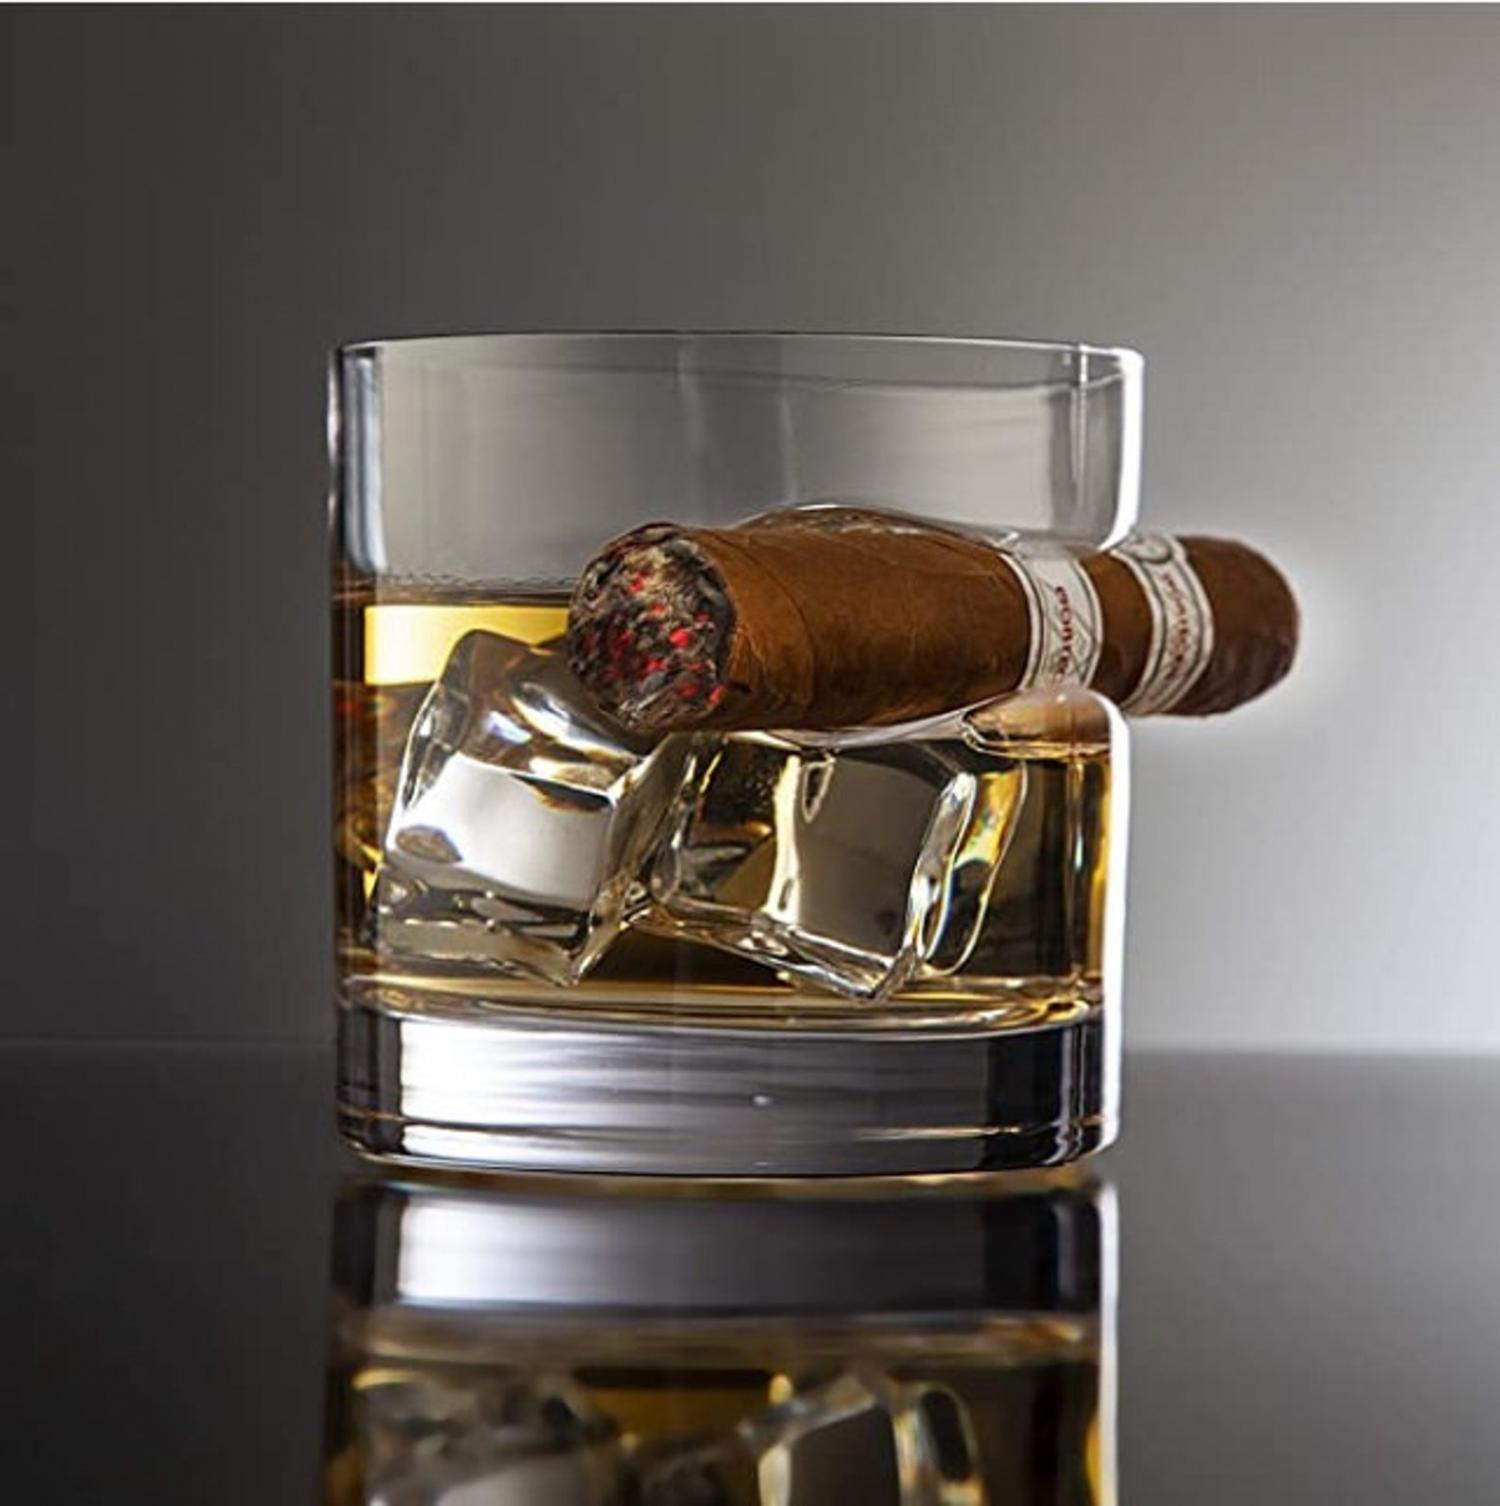 Cigar Holding Whiskey Glass - Scotch Glass Holds a Cigar on the side of it